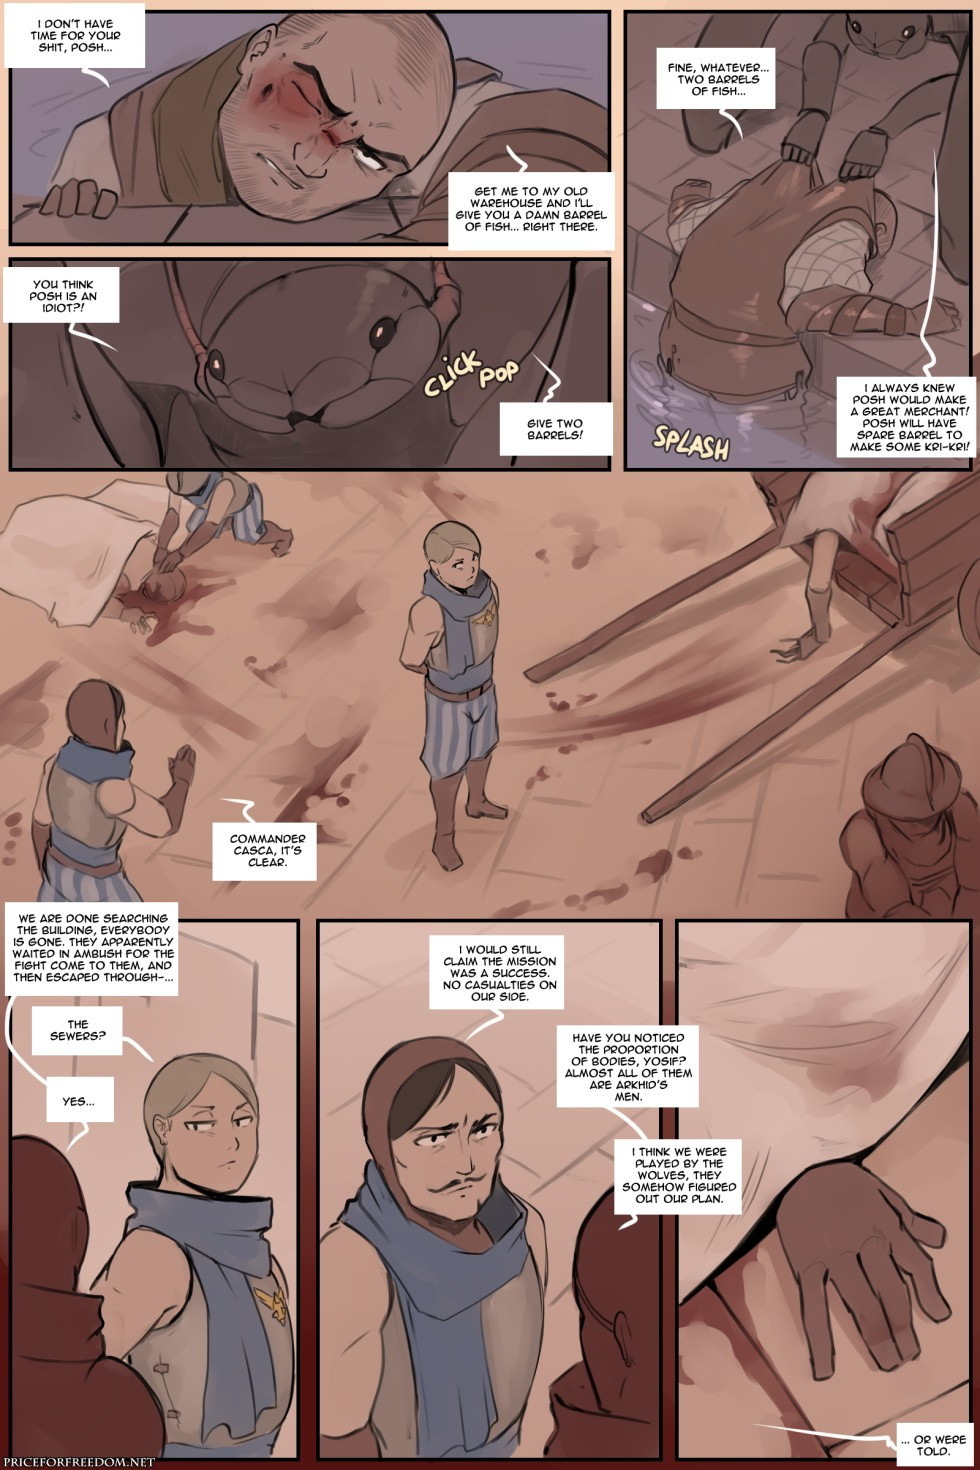 Price For Freedom - Page 343